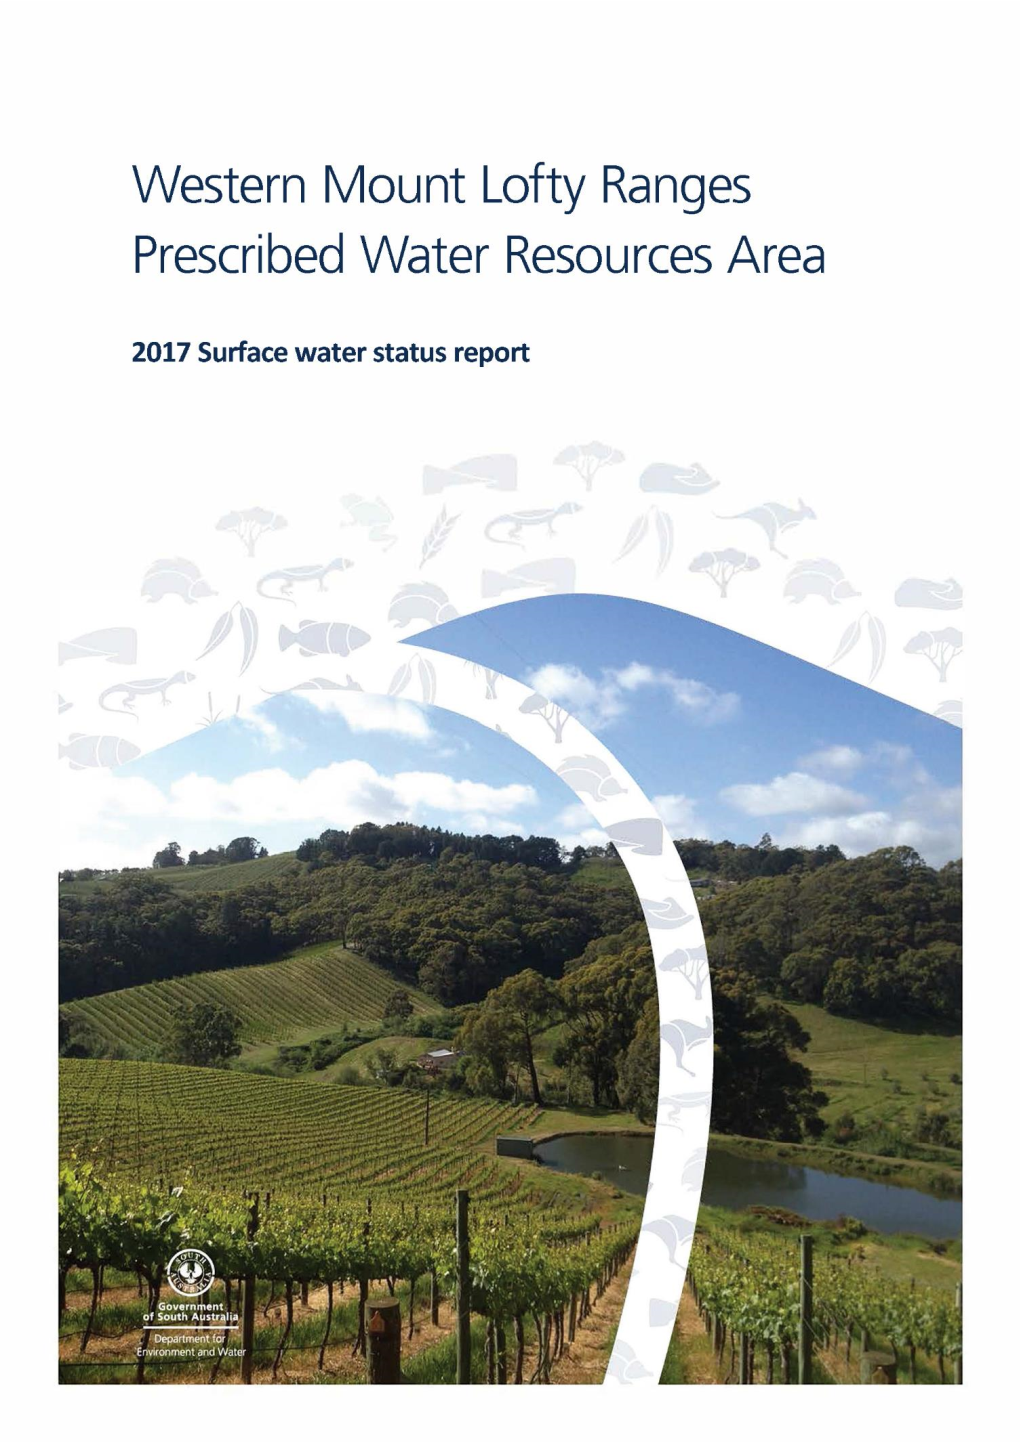 2017 Surface Water Status Report, Government of South Australia, Department for Environment and Water, Adelaide